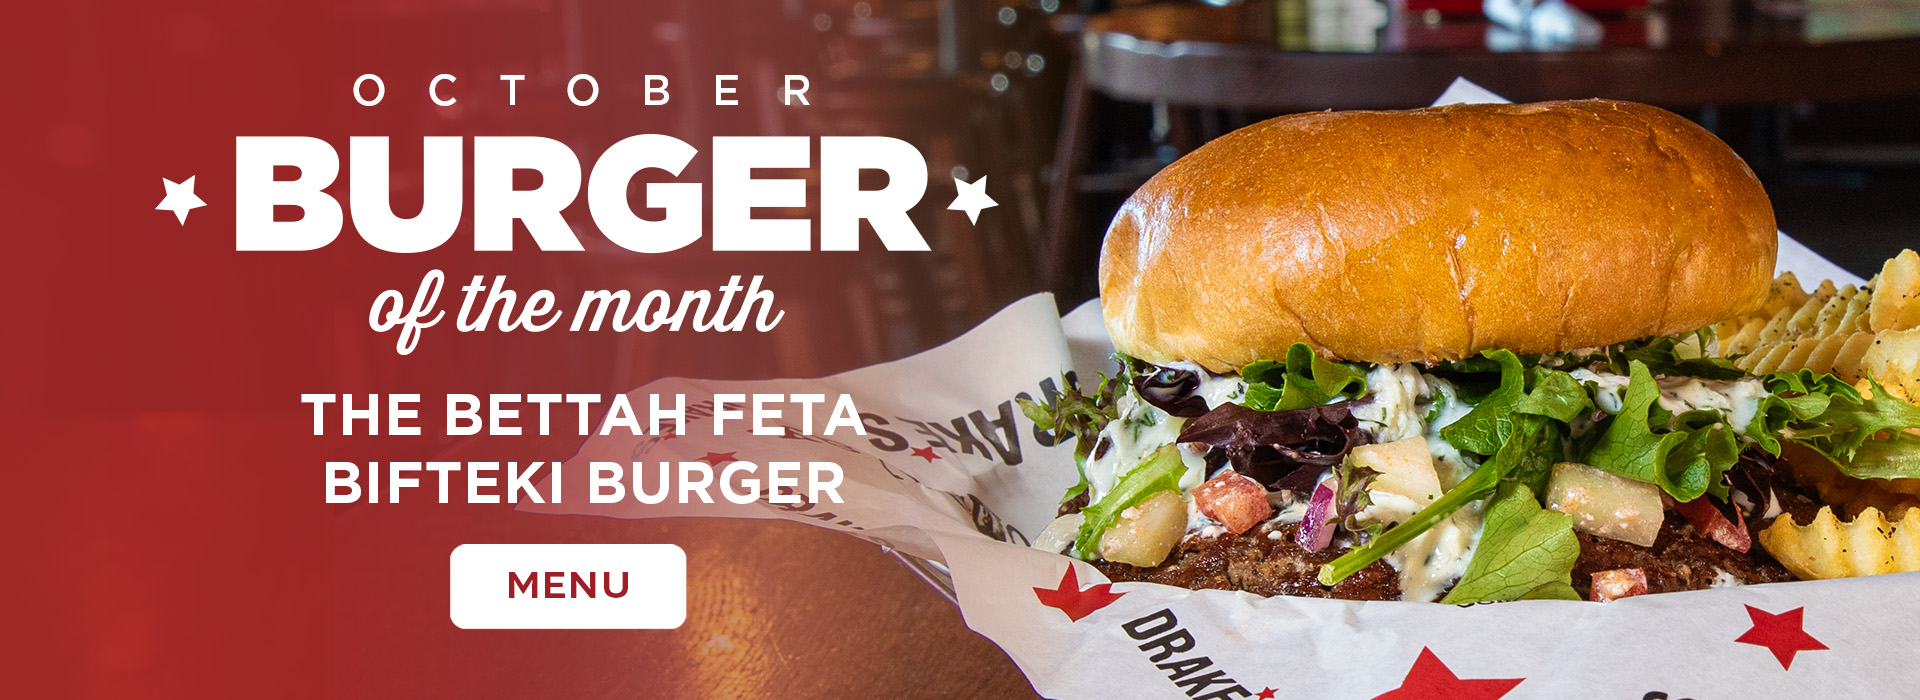 Click or tap here to see our burger of the month special, the chorizo mini burgers